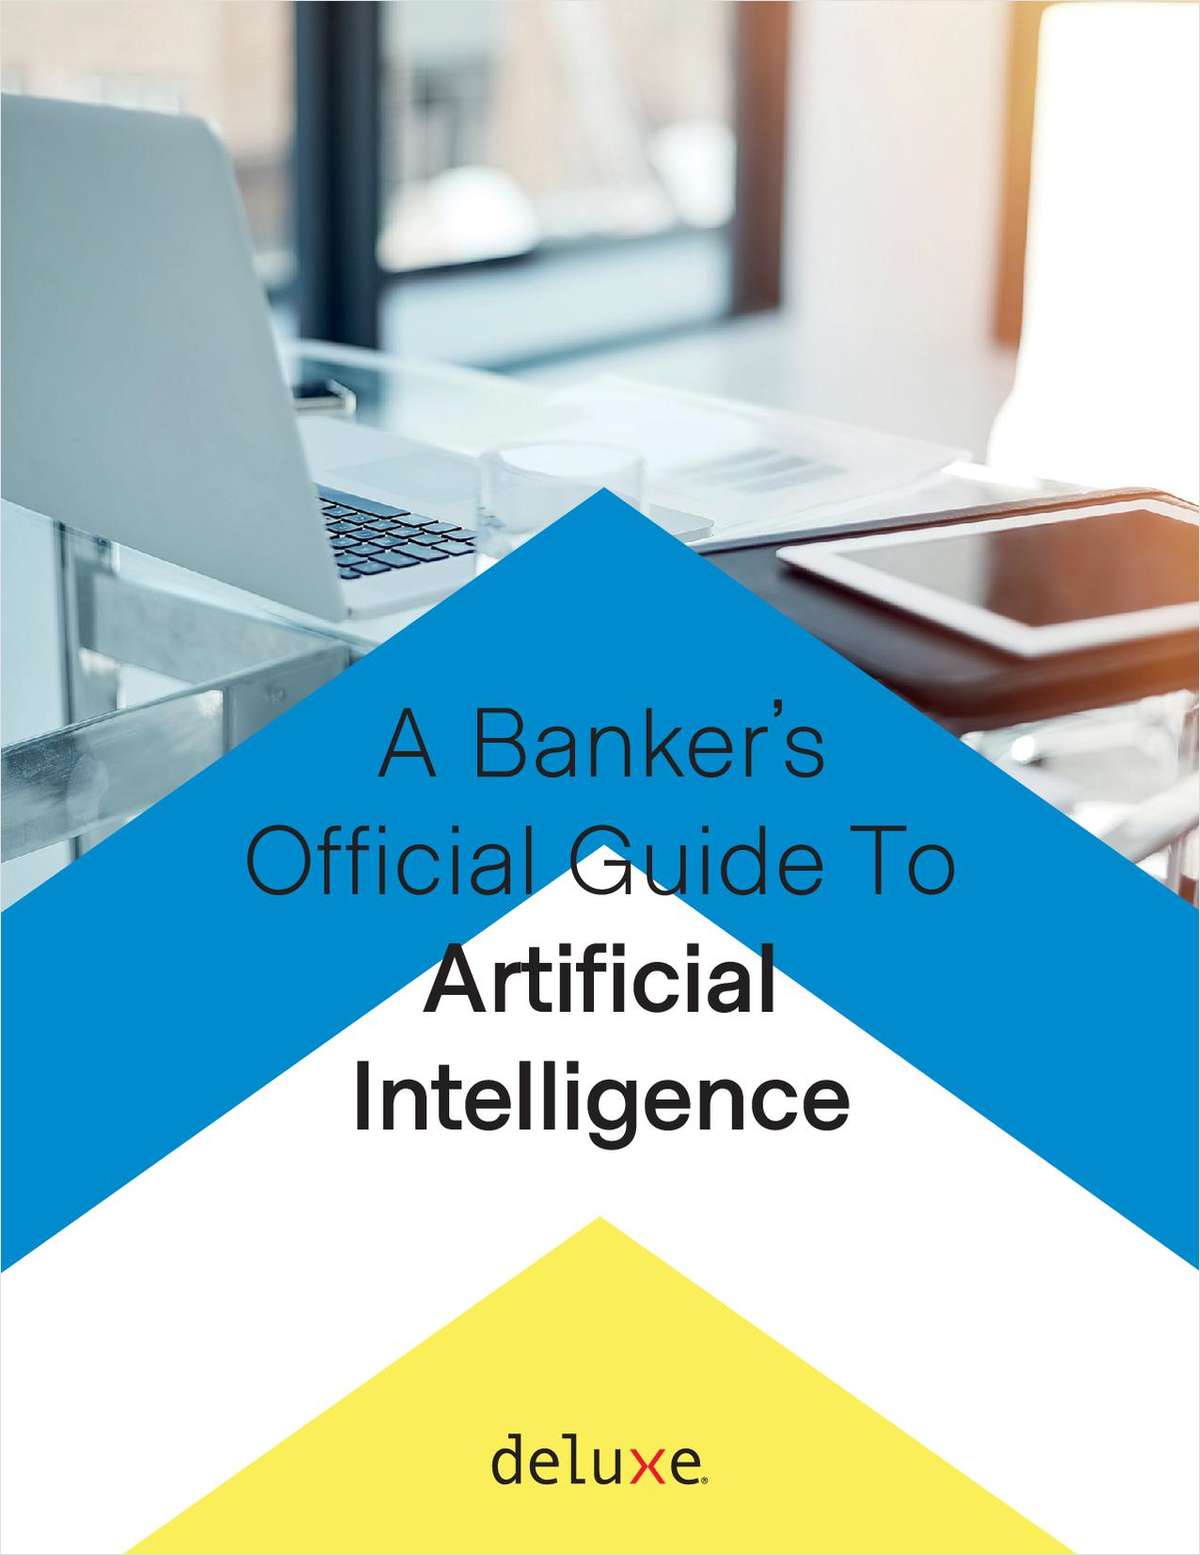 A Banker's Official Guide to Artificial Intelligence